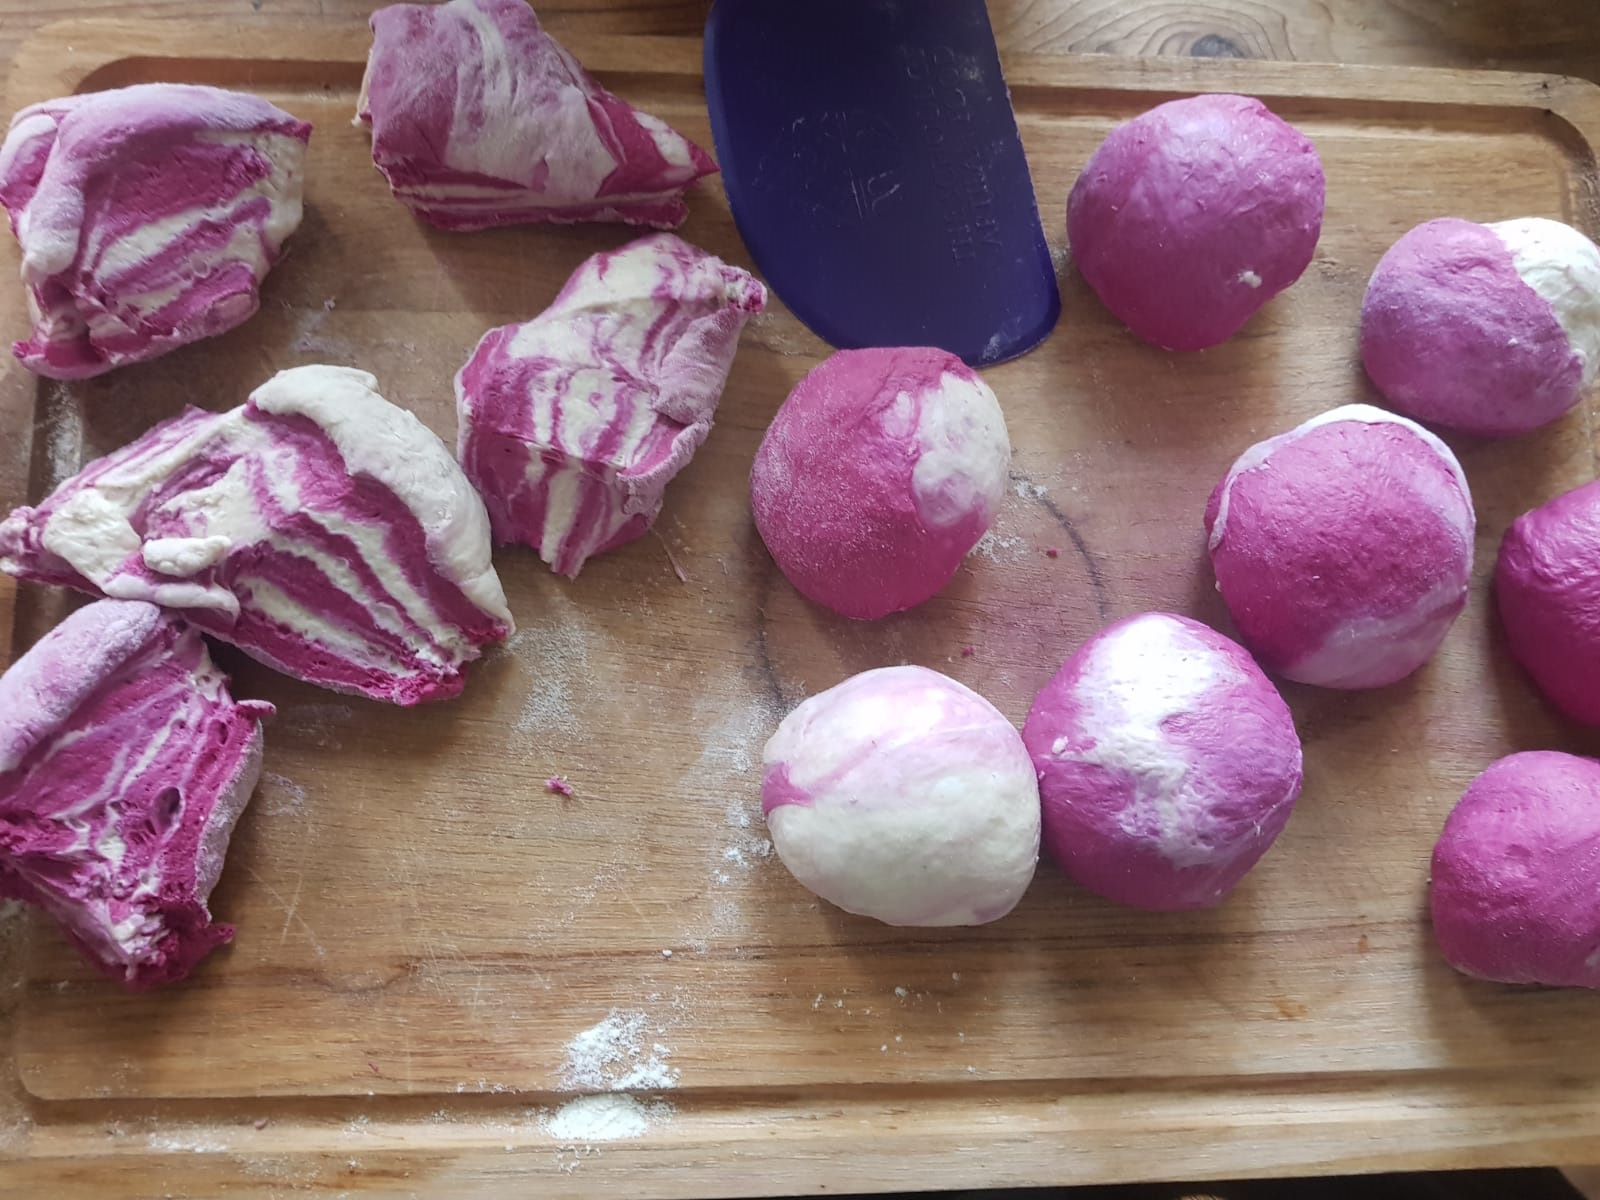 Marbled pink and white dough rough cut and shaped into balls